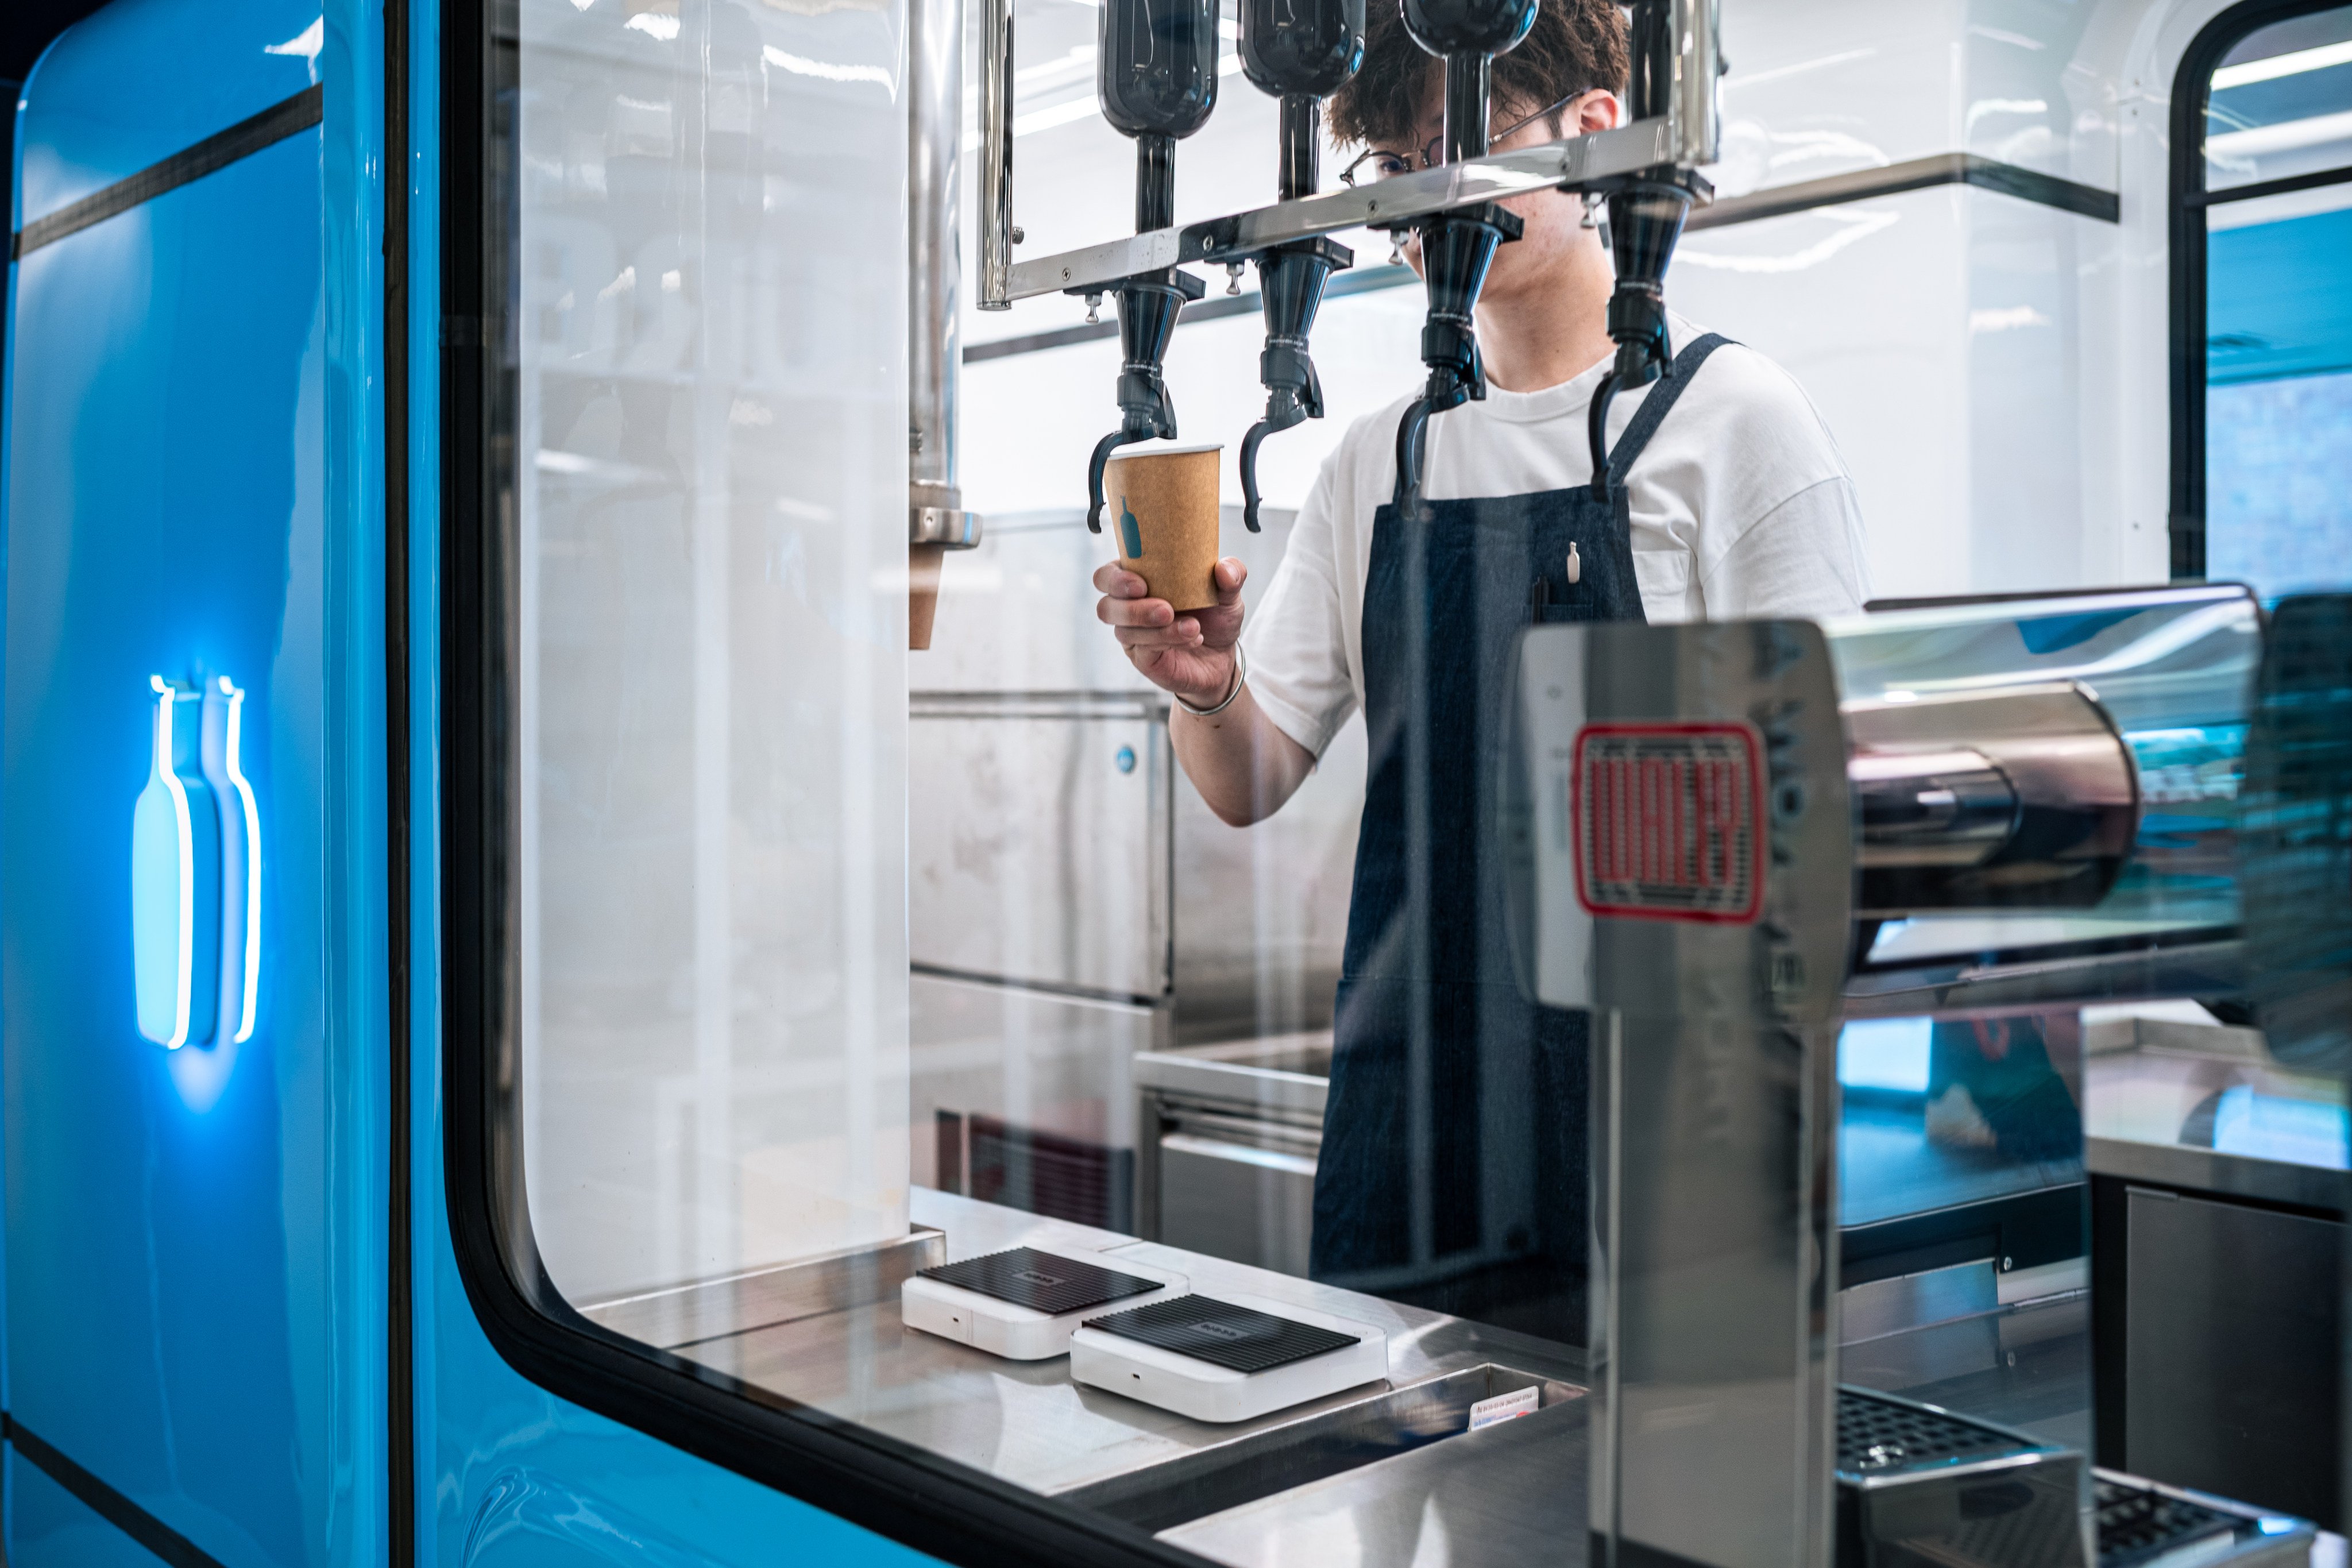 At Blue Bottle’s Hong Kong International Airport kiosk, there are no espresso machines. Instead, the company sells what it calls craft instant espresso. Photo: Blue Bottle